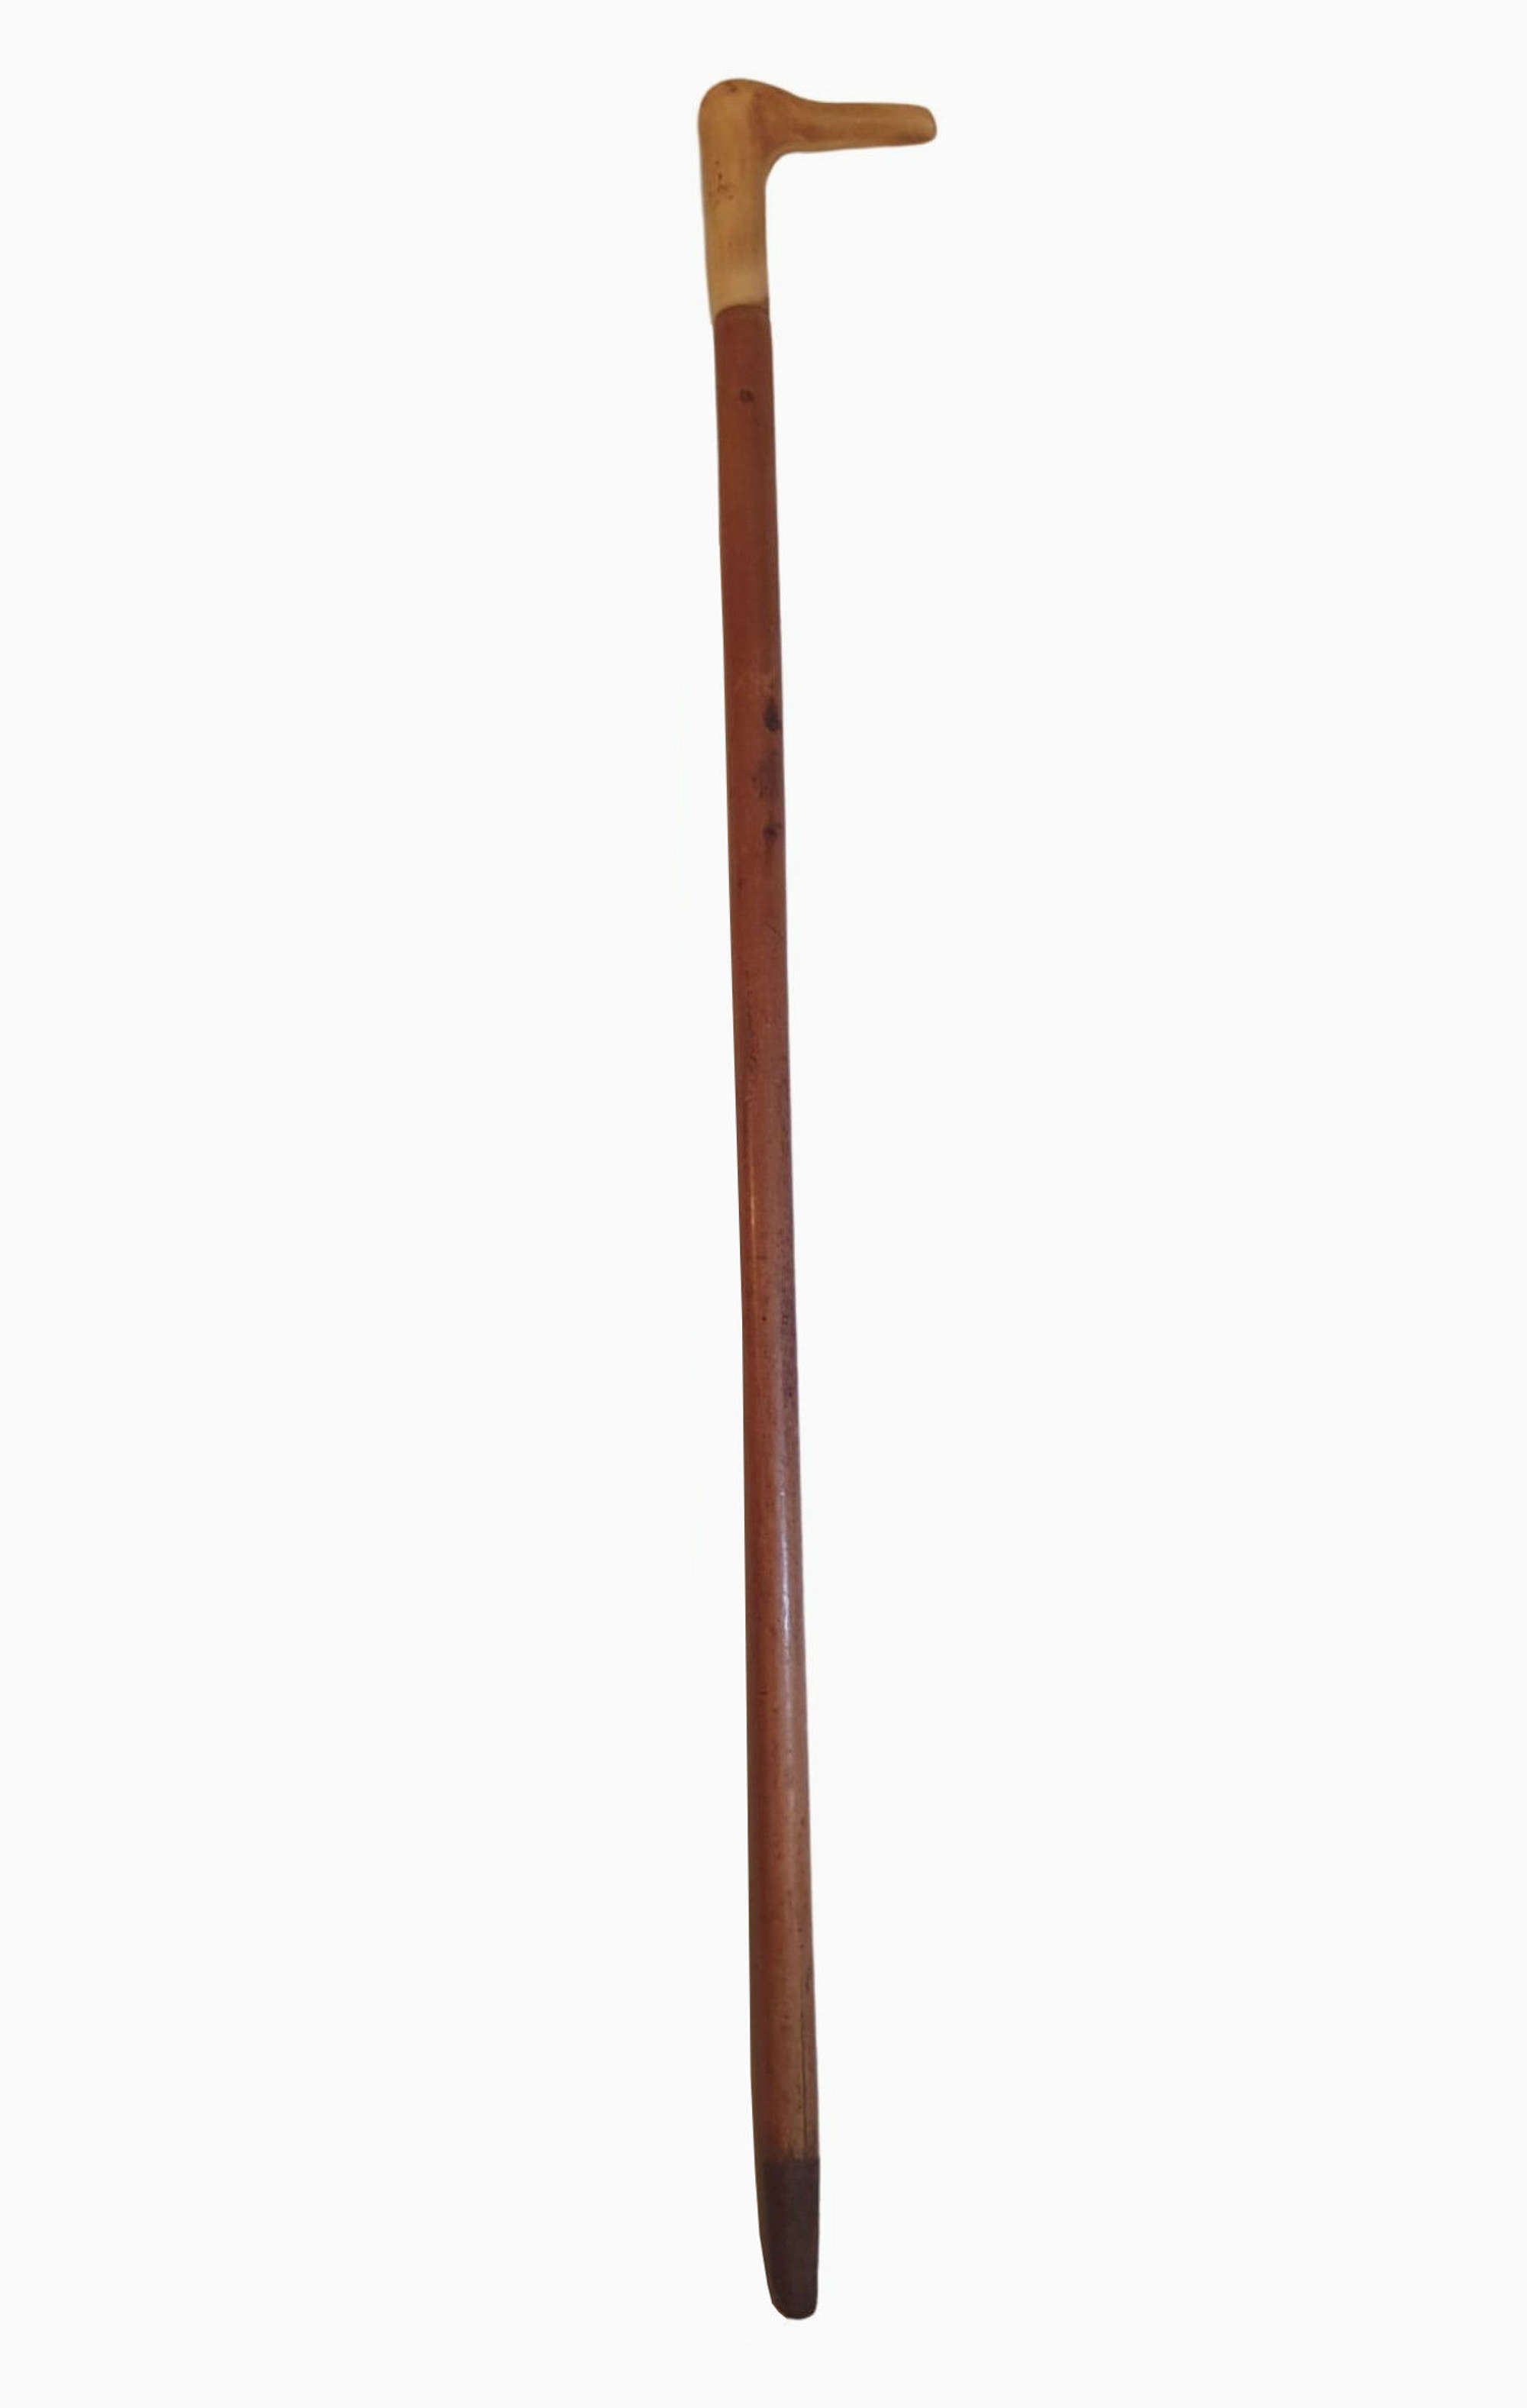 A Superb 19th Century Walking Stick With Bone Handle